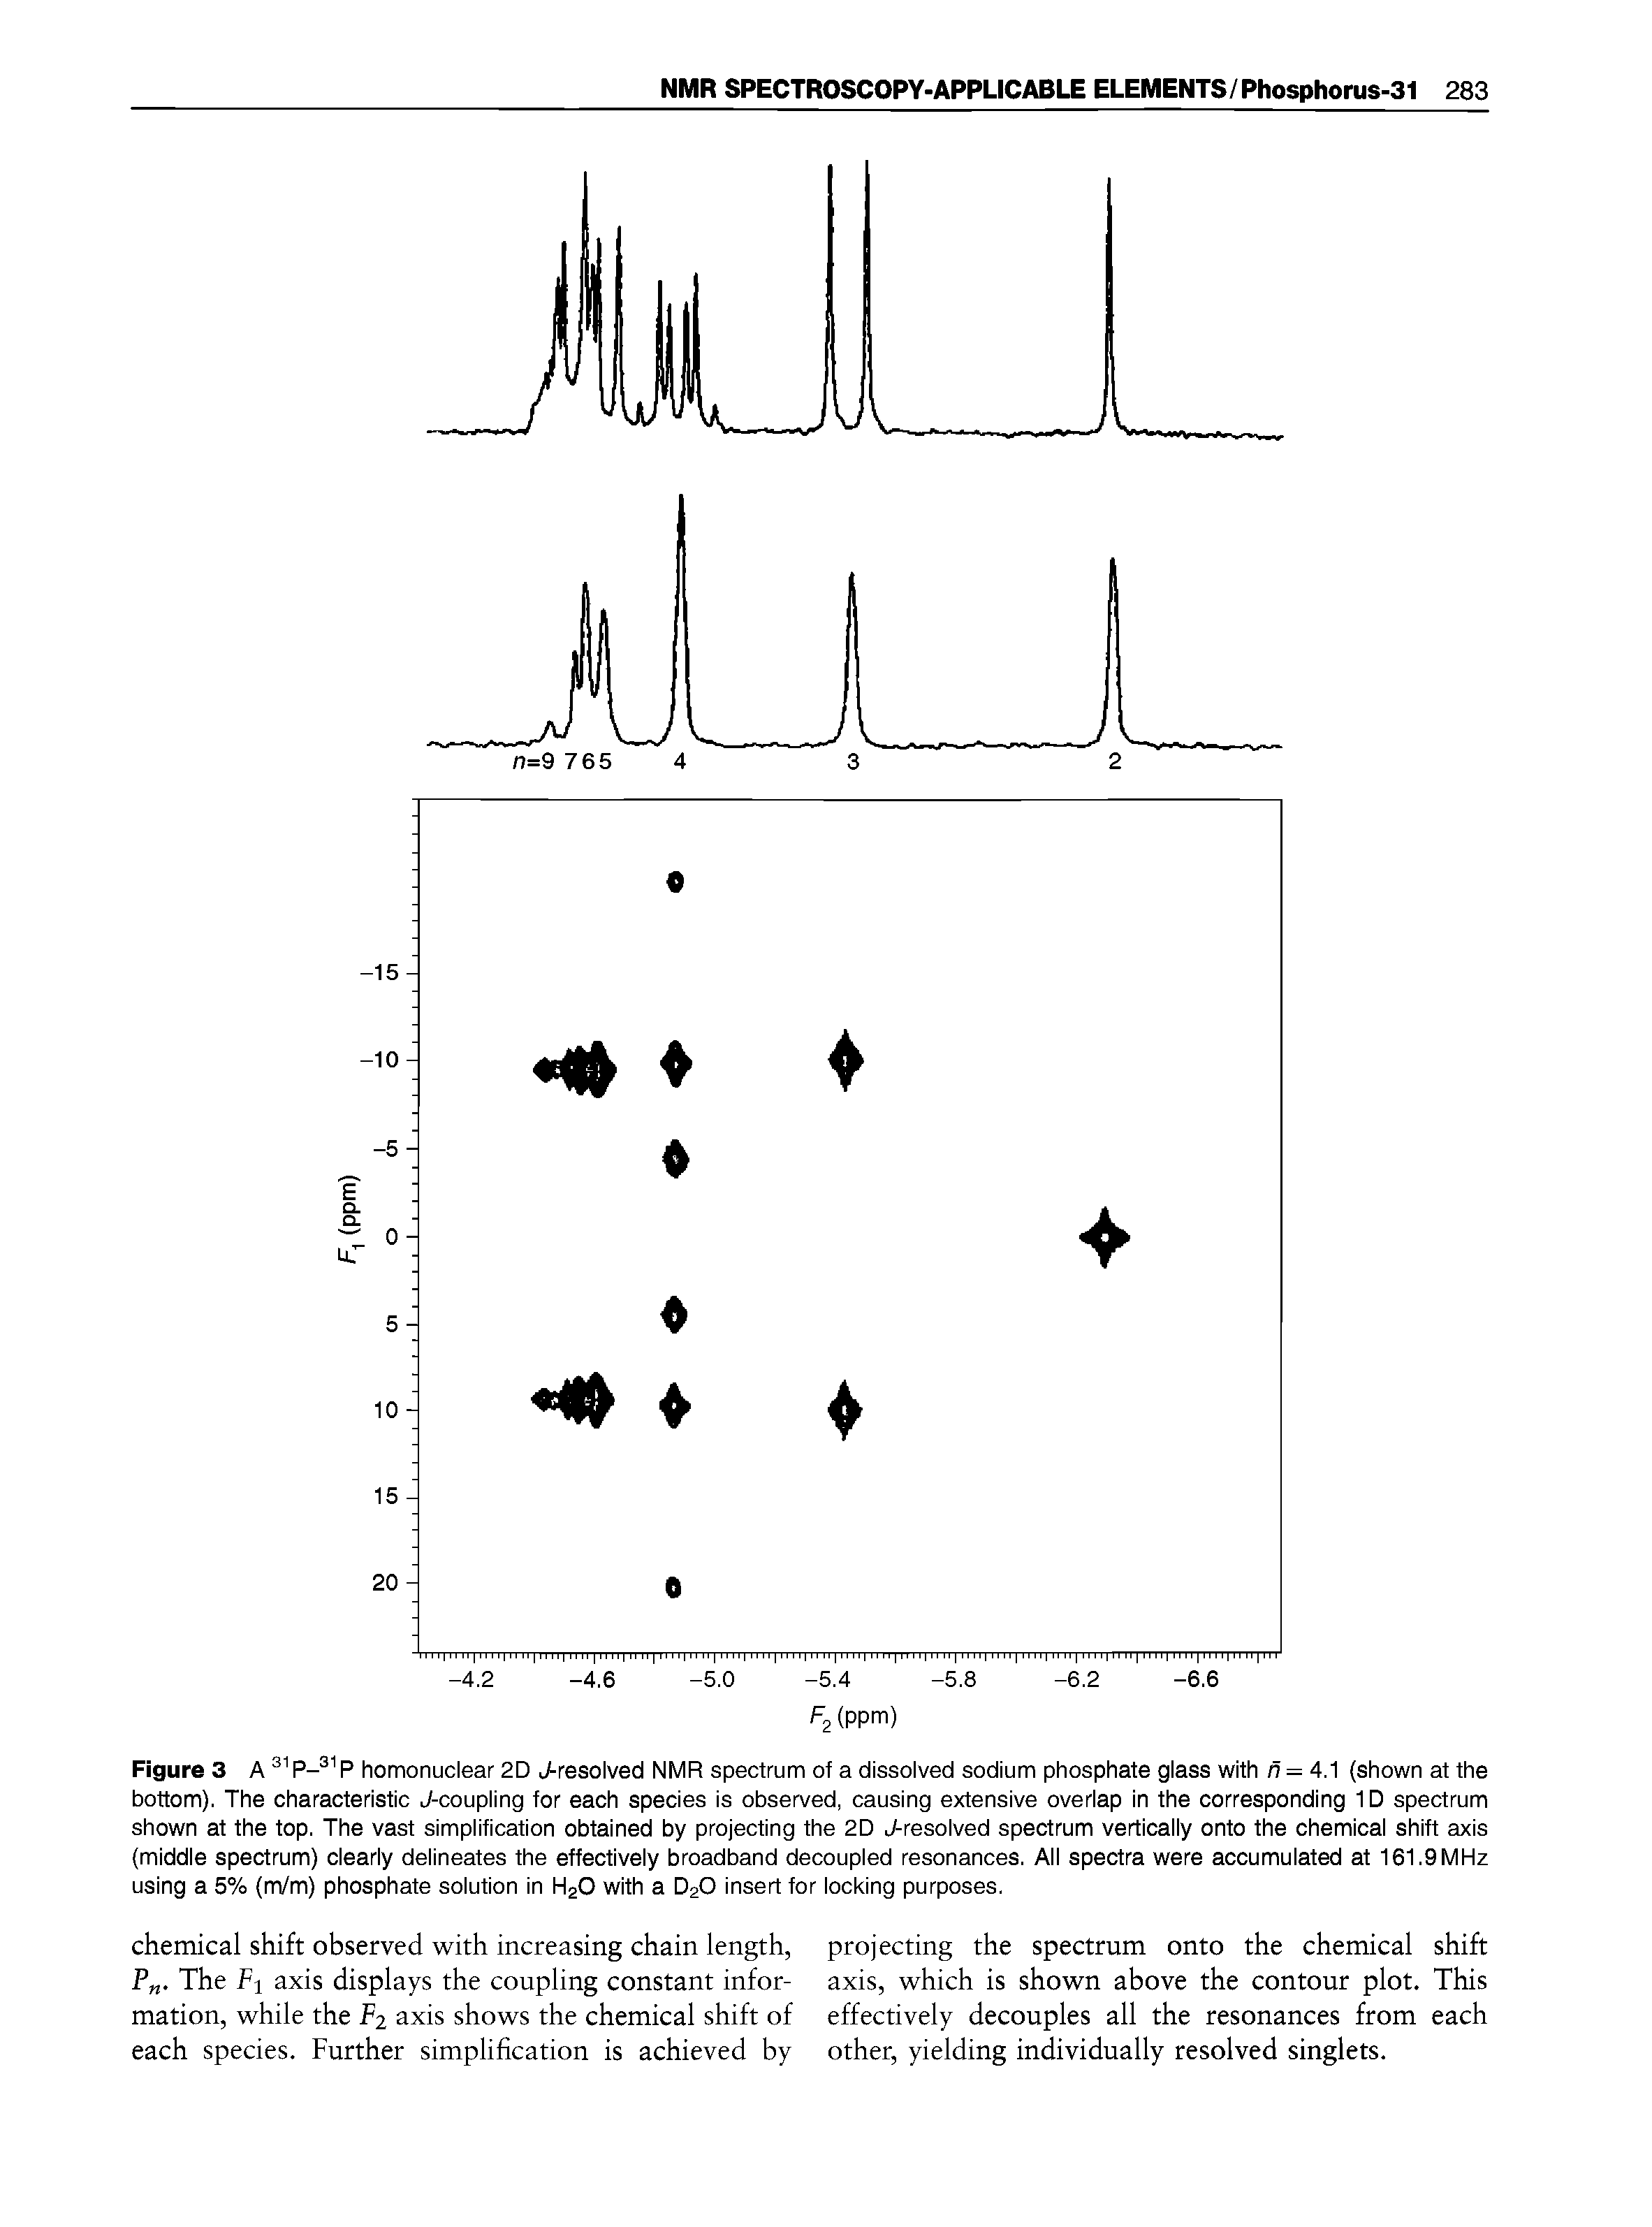 Figure 3 A 3ip 3ip homonuclear 2D J-resolved NMR spectrum of a dissolved sodium phosphate glass with n = 4.1 (shown at the bottom). The characteristic J-coupling for each species is observed, causing extensive overlap in the corresponding 1D spectrum shown at the top. The vast simplification obtained by projecting the 2D J-resolved spectrum vertically onto the chemical shift axis (middle spectrum) clearly delineates the effectively broadband decoupled resonances. All spectra were accumulated at 161.9MHz using a 5% (m/m) phosphate solution in H2O with a D2O insert for locking purposes.